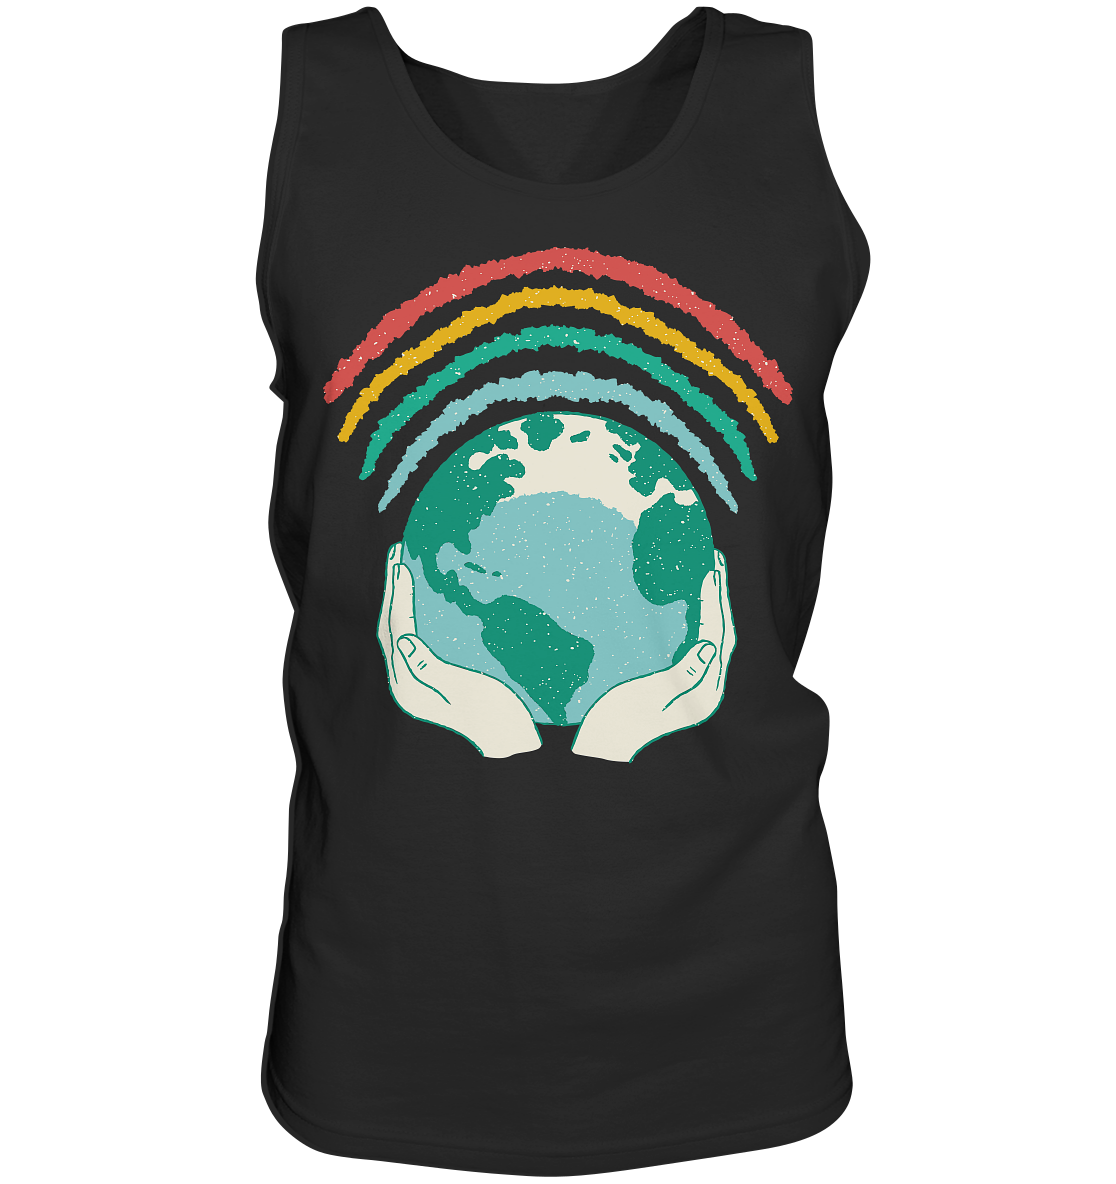 Rainbow with globe in hands - tank top